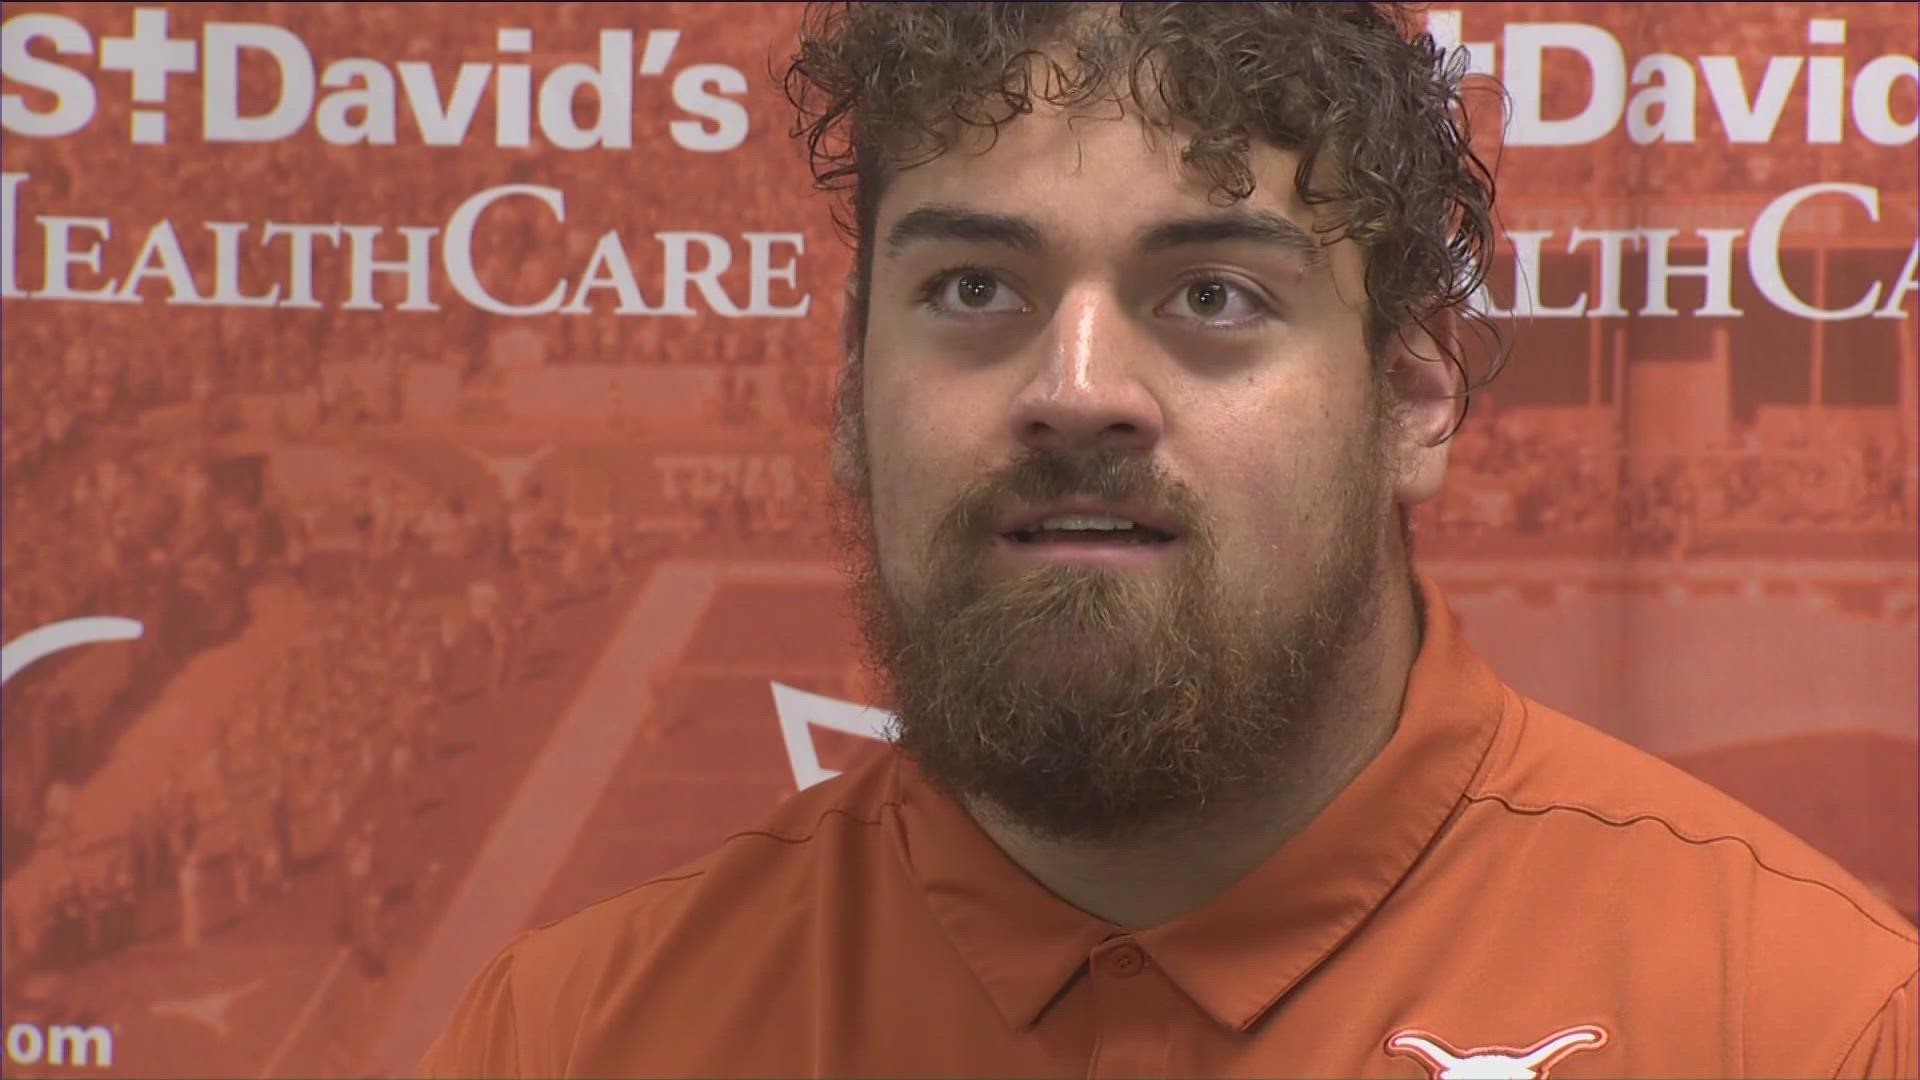 Both Texas football players are suffering from torn ACLs.